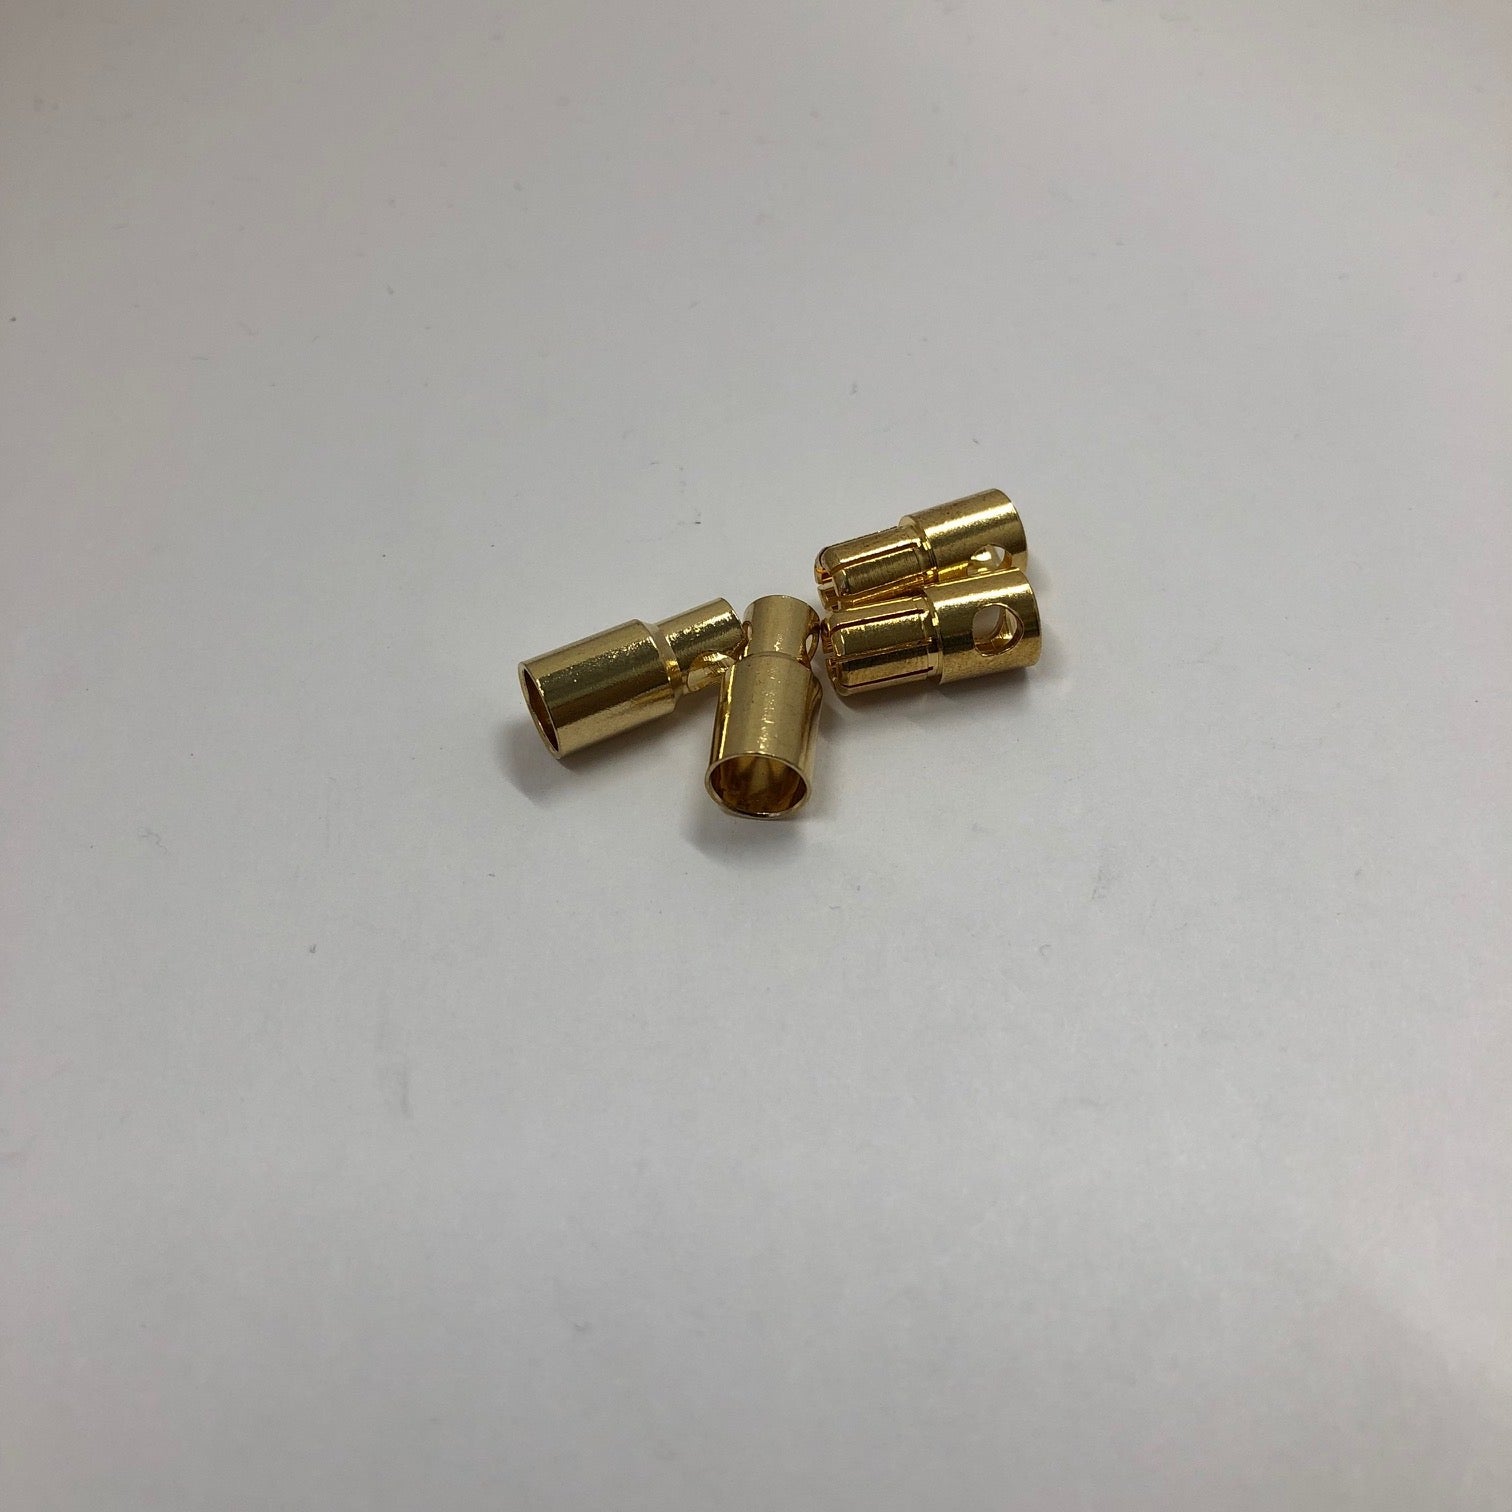 6mm Gold Bullet Connector Set - 2 Pairs